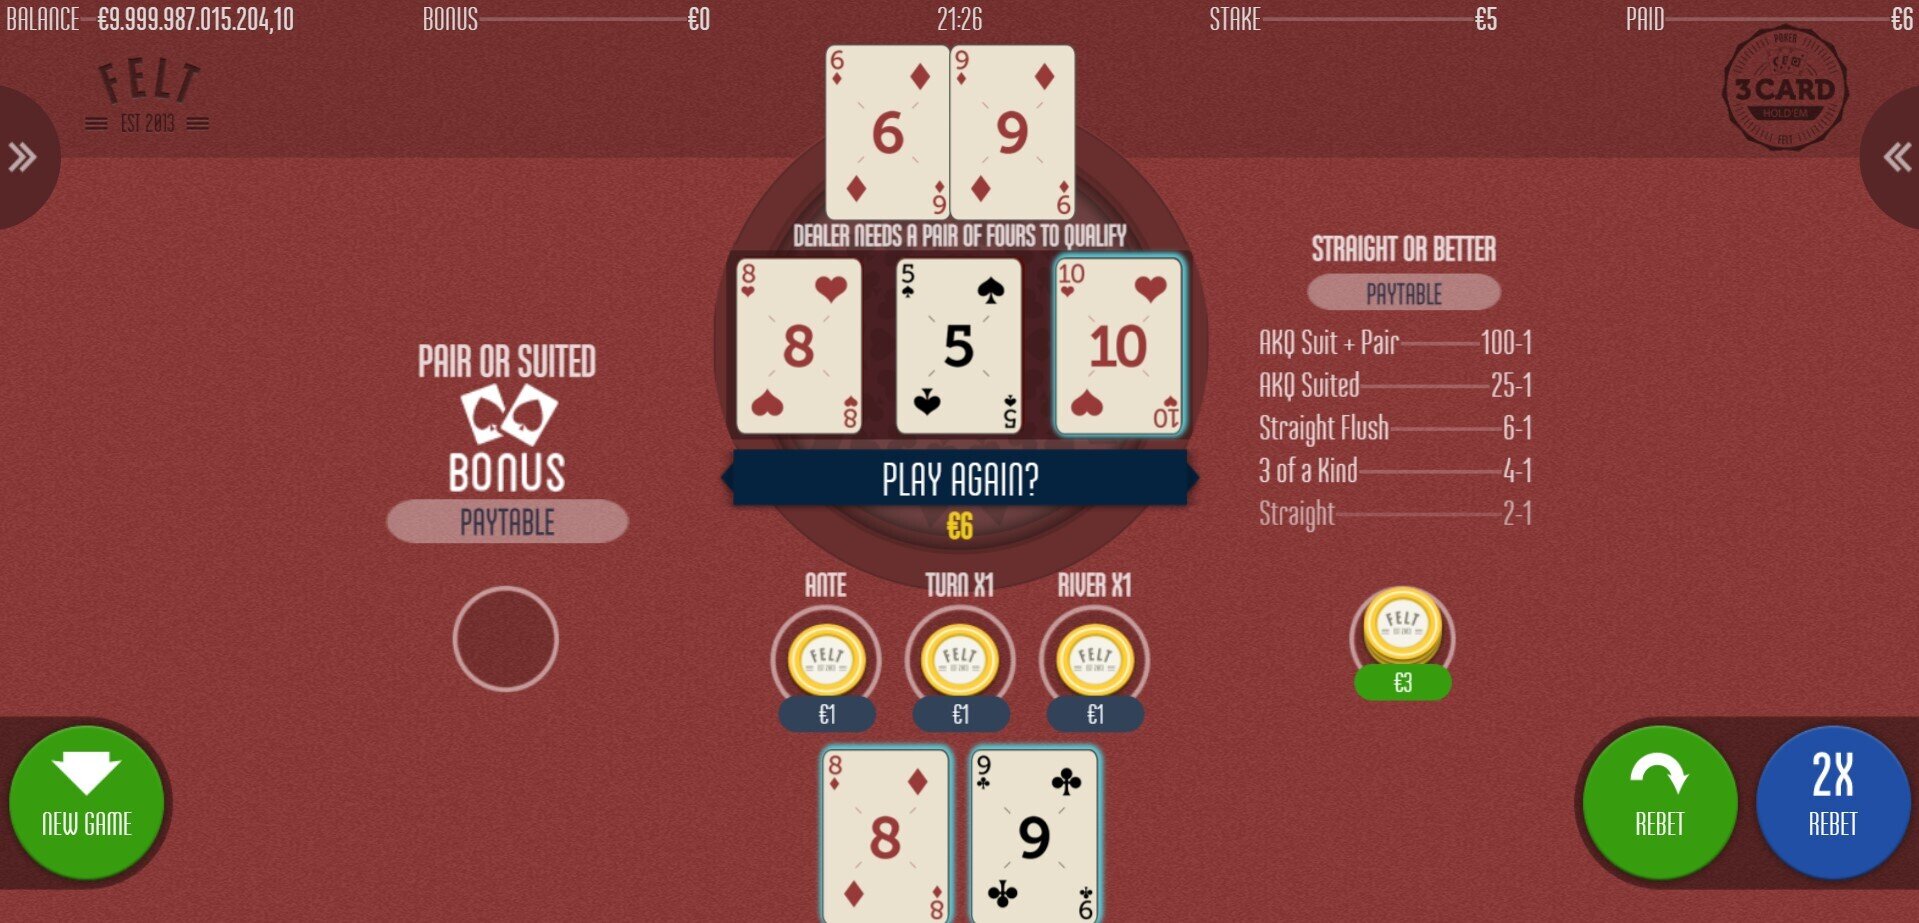 3 Card Hold'em Straight or Better Wins